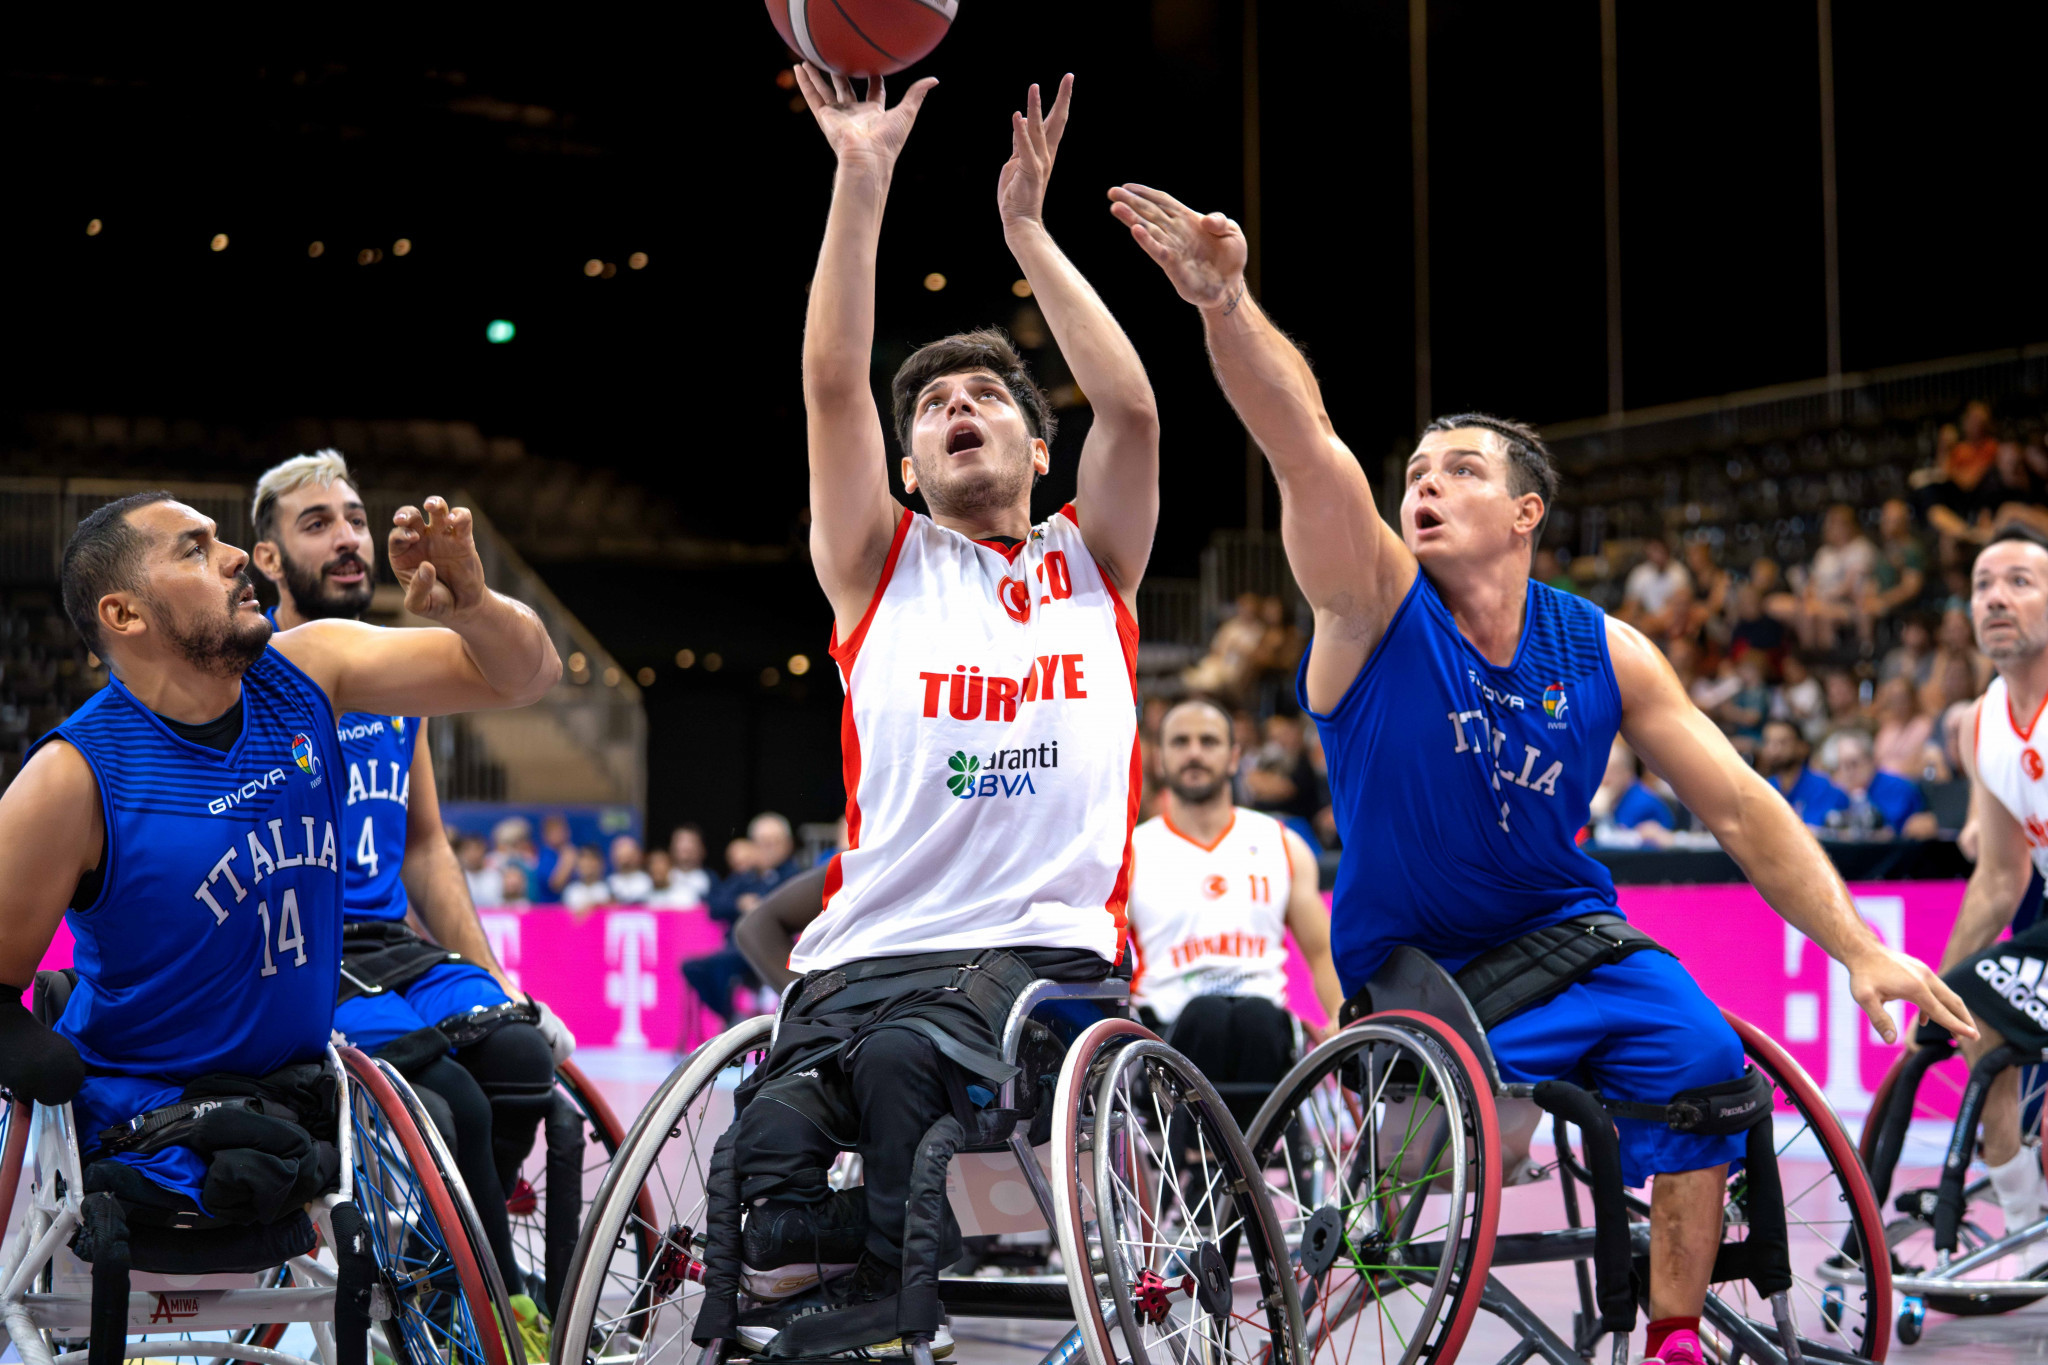 Turkey went down 70-66 to Italy in the contest for fifth place ©EPC